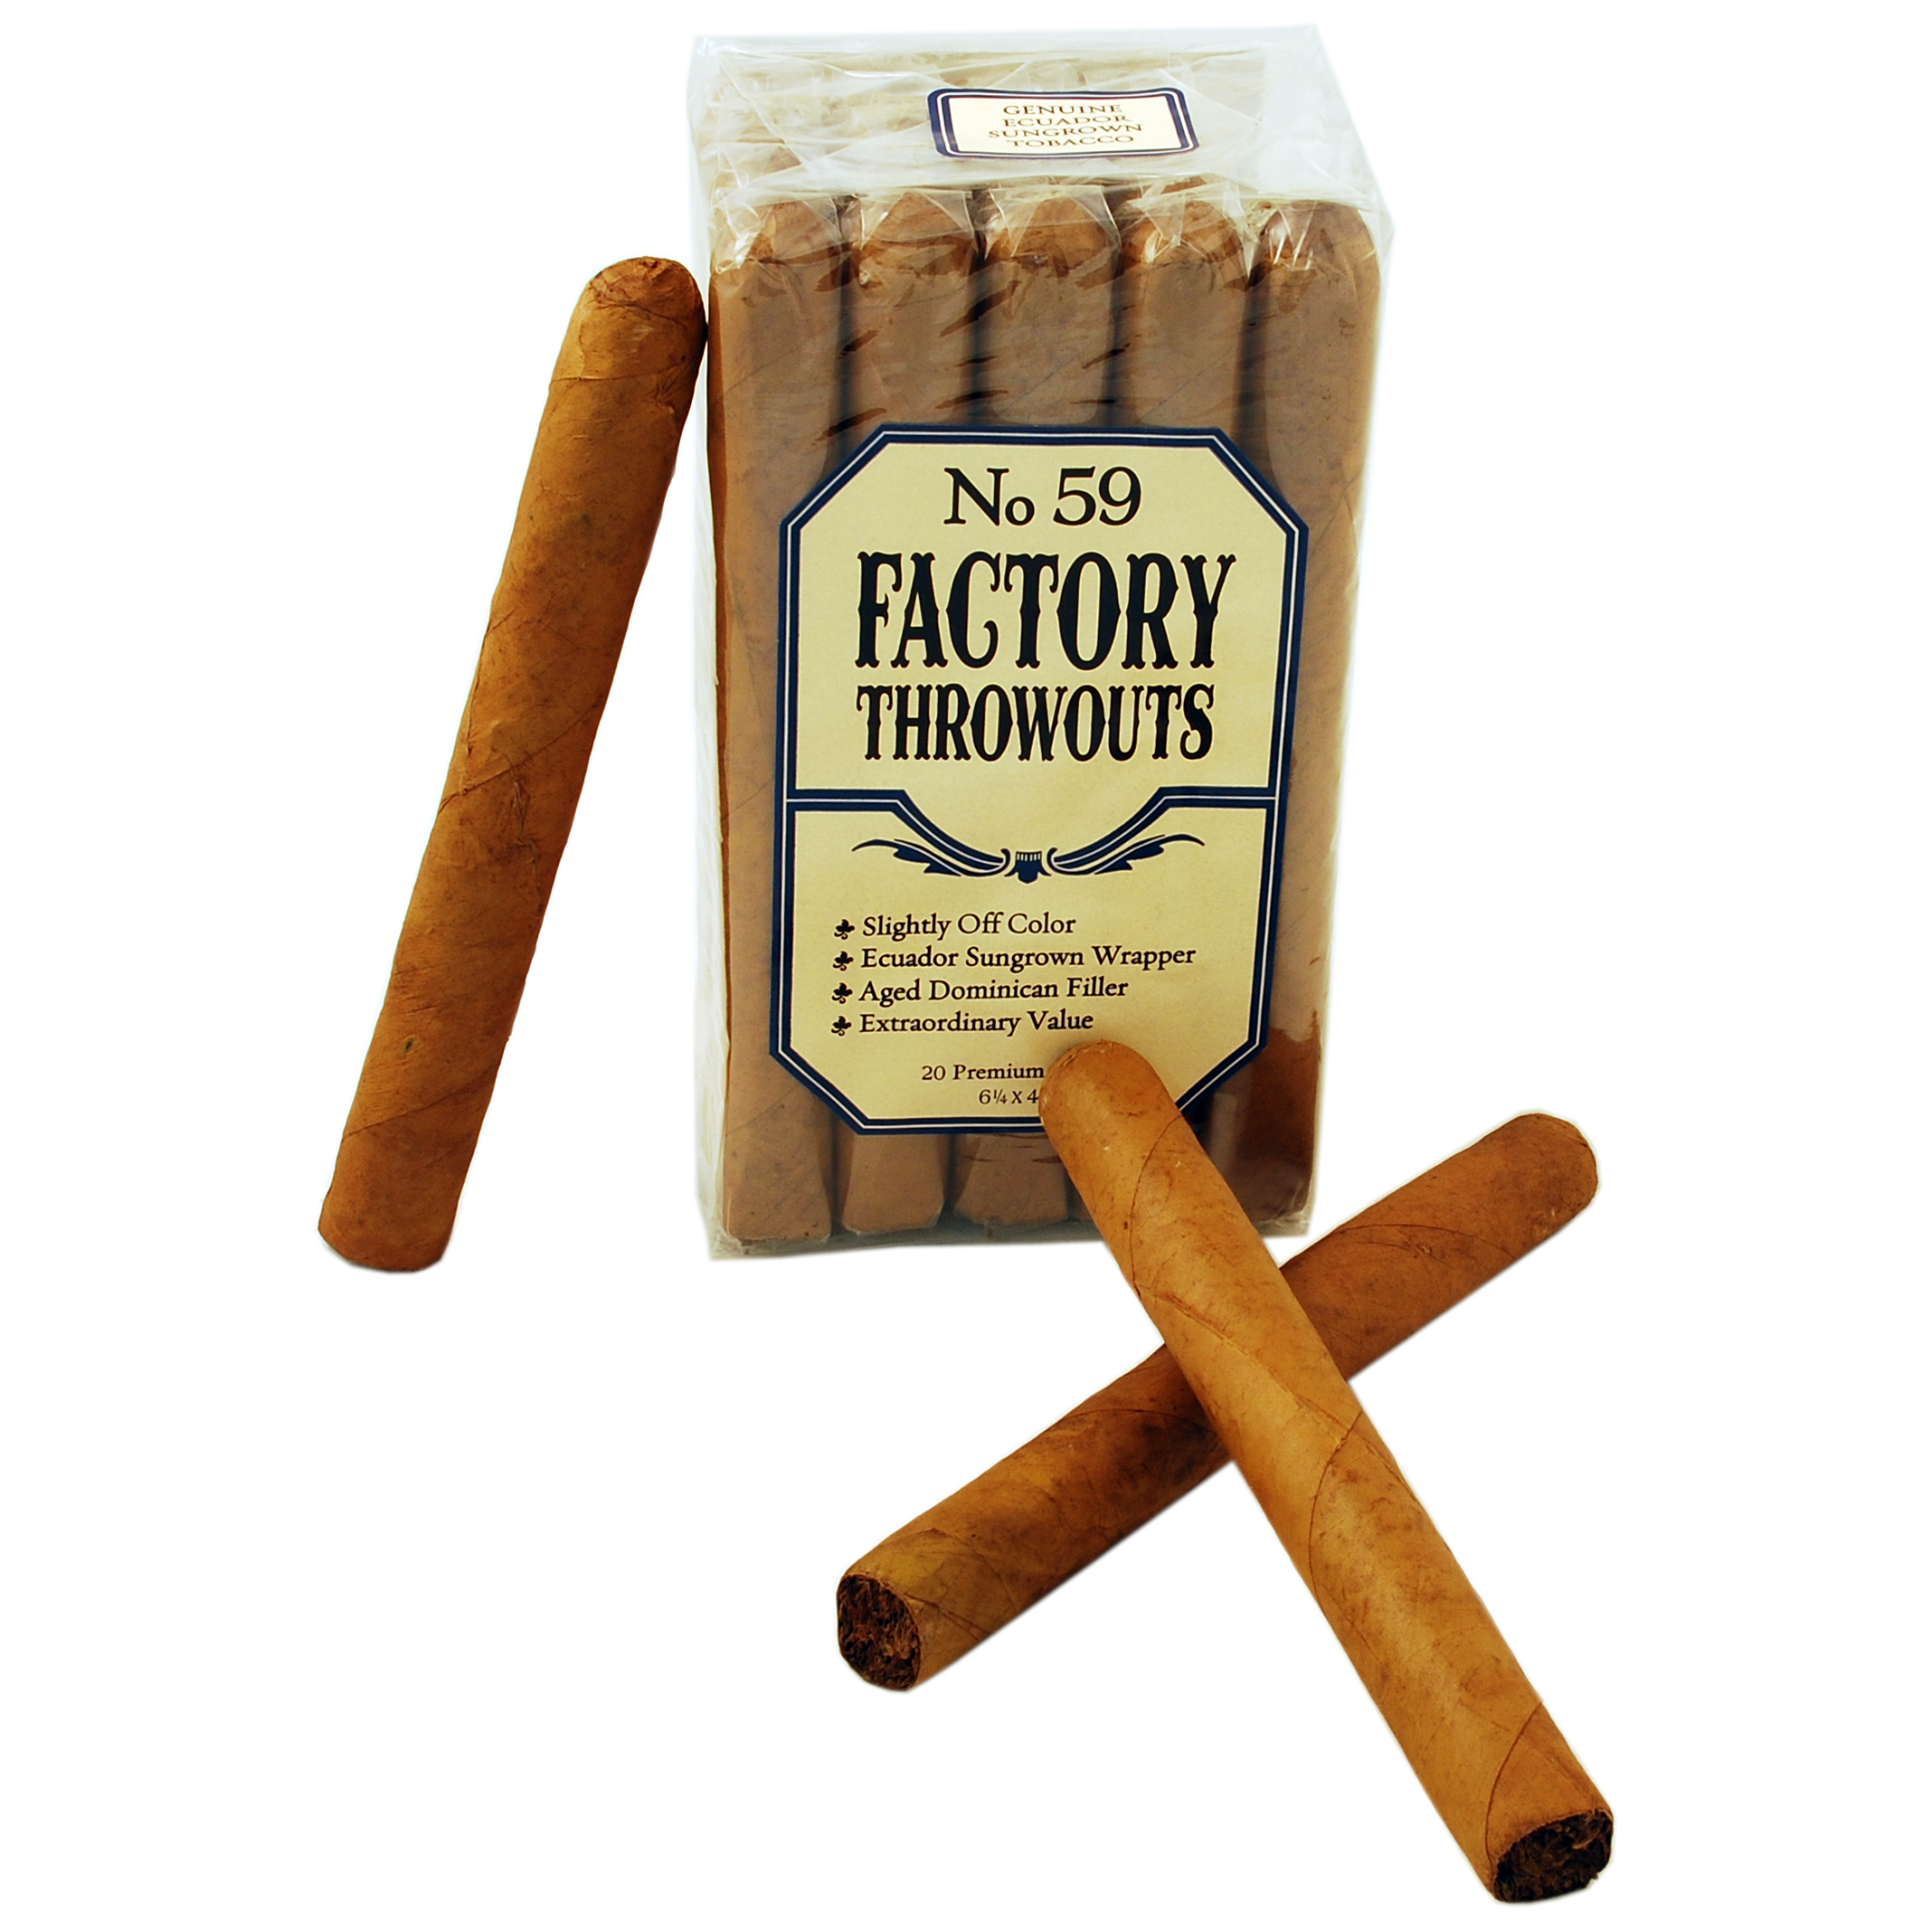 No. 59 Factory Throwouts cigars